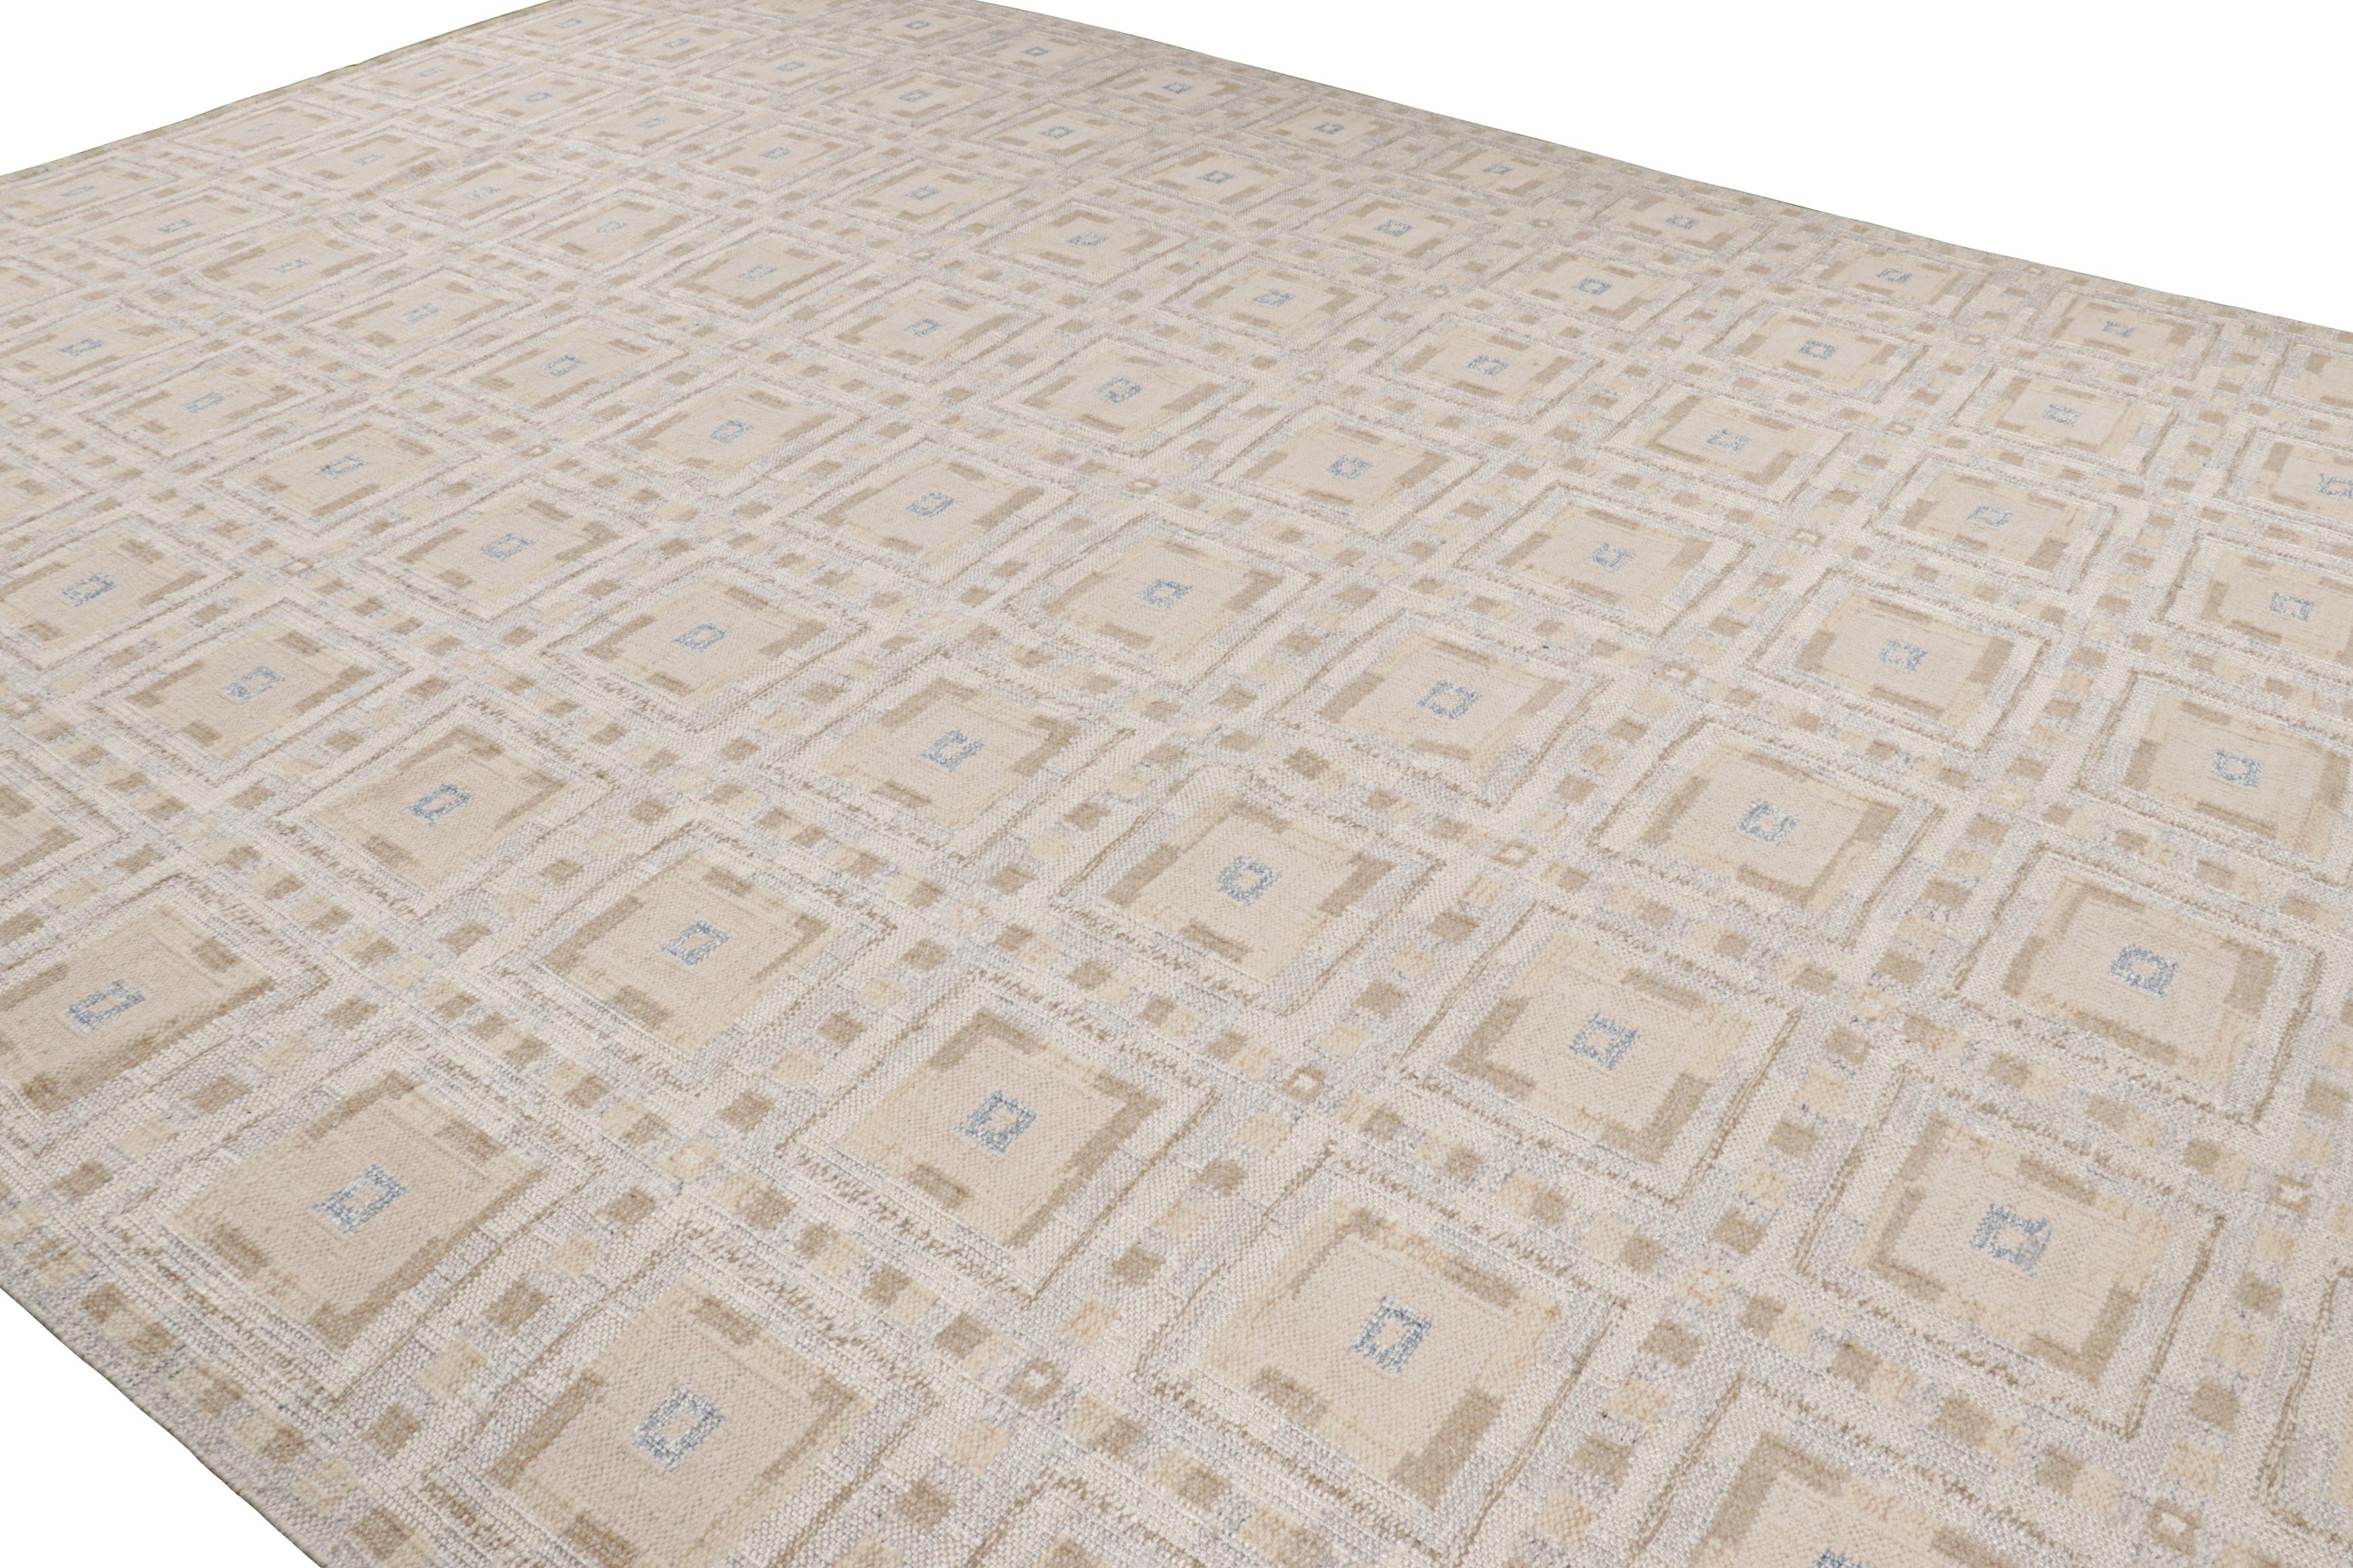 Indian Rug & Kilim’s Scandinavian Rug with White and Beige-Brown Geometric Patterns For Sale